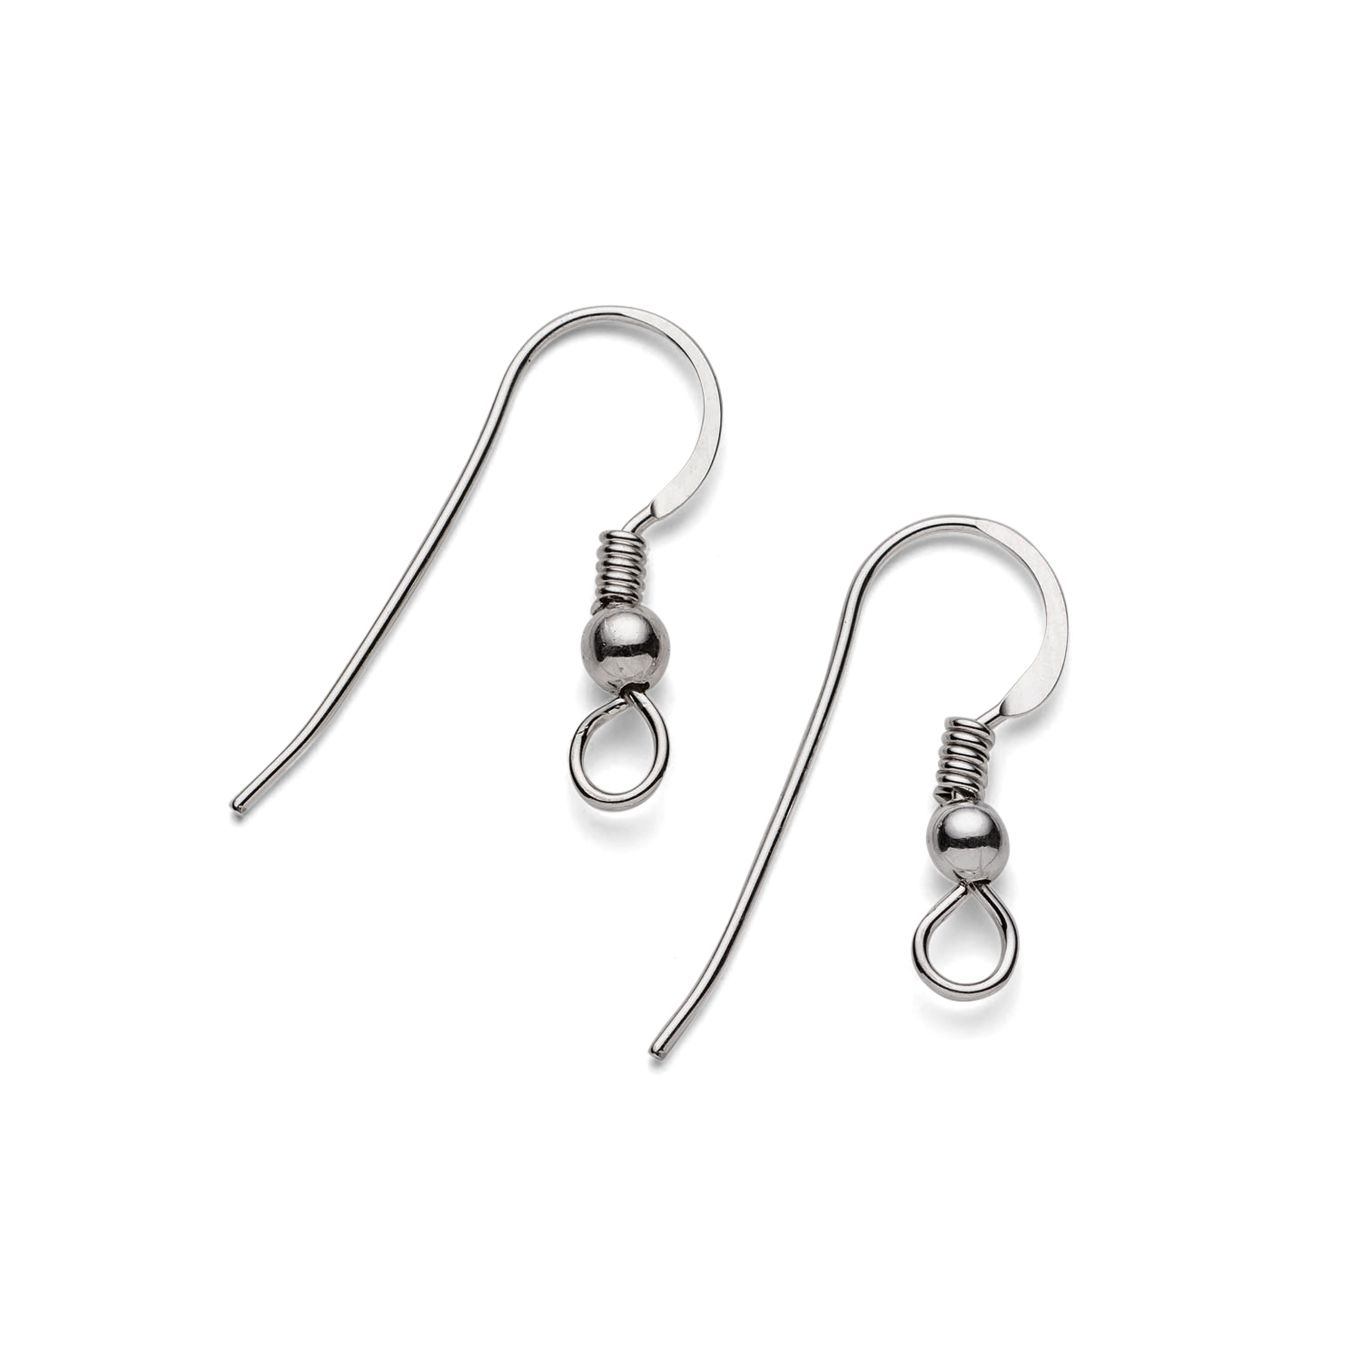 Sterling Silver Shepherds Crook Earwire with Bead & Spring (Pair)